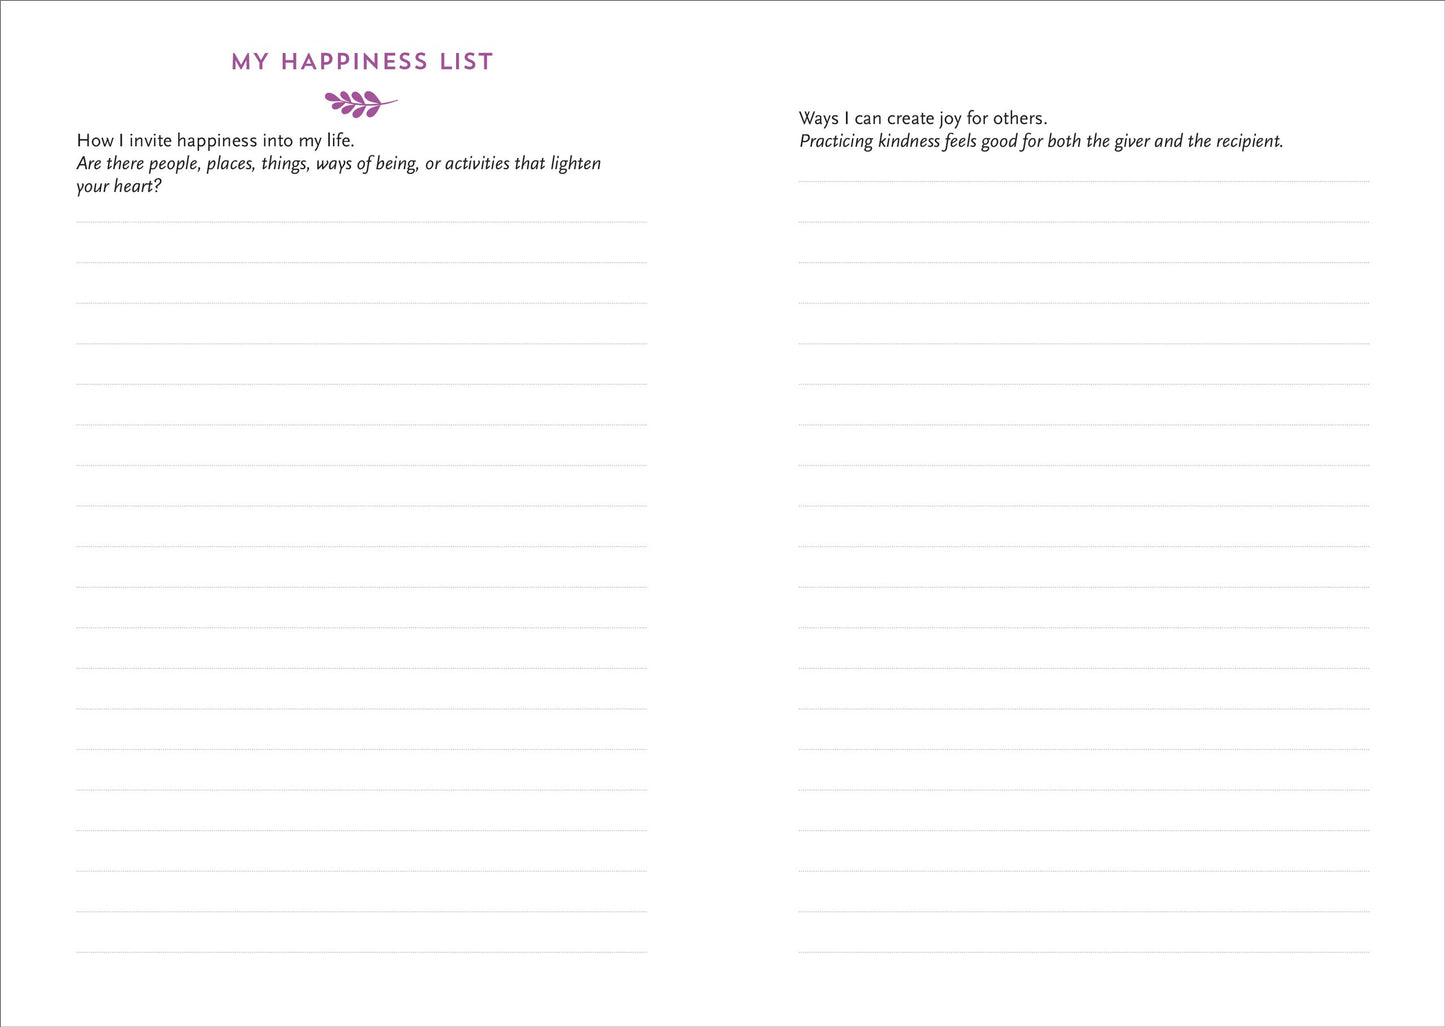 A Daily Dose of Happiness Journal: A Daily Journal for Cultivating Happiness in Your Life